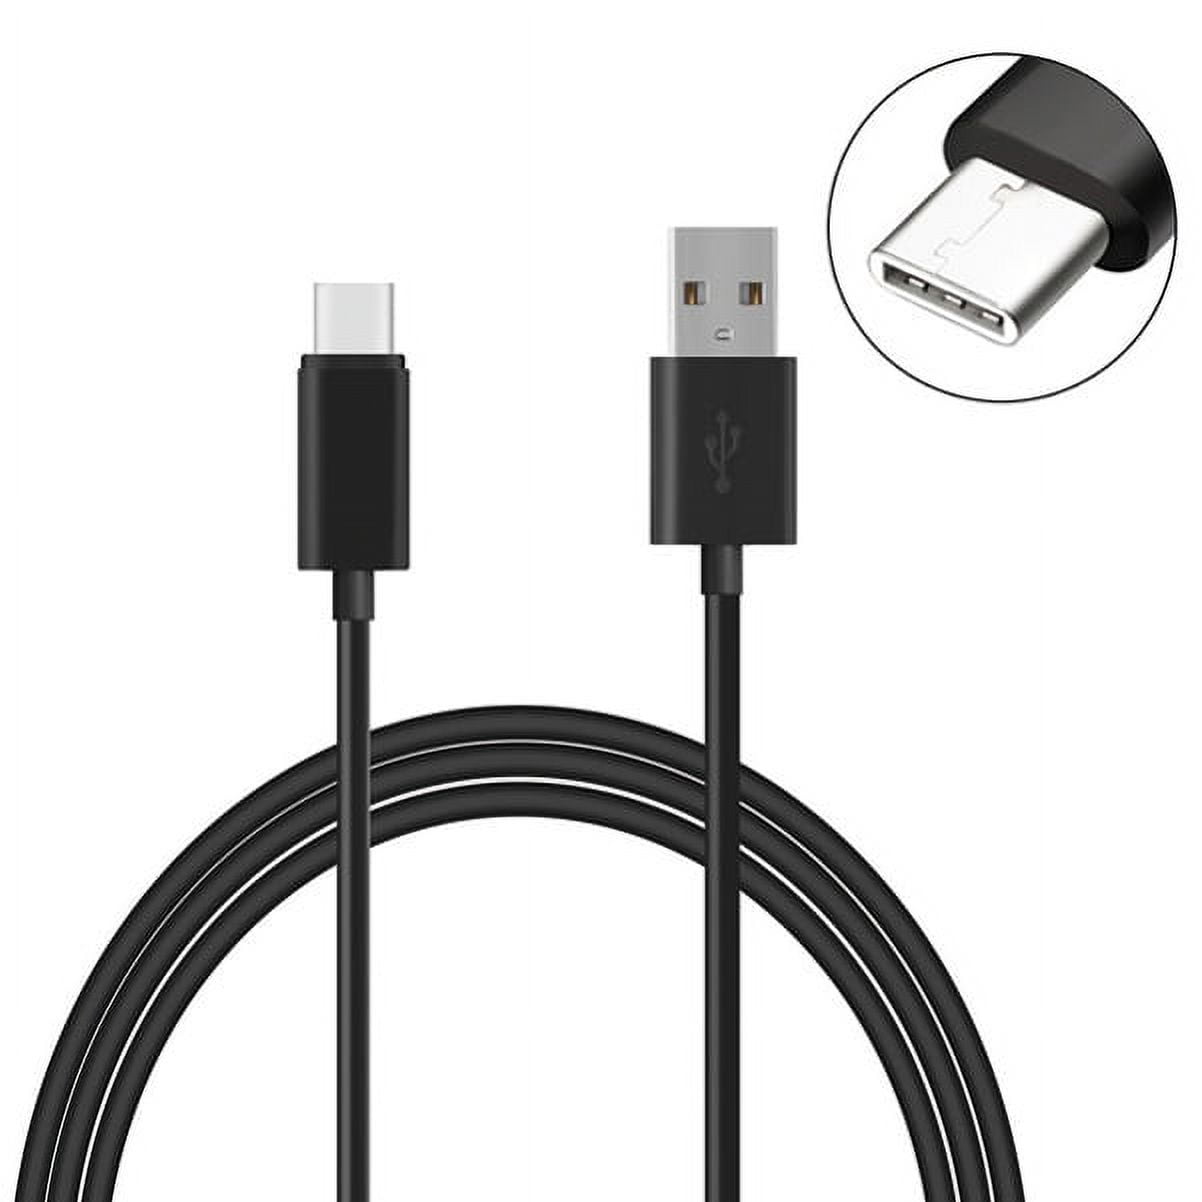 10ft USB Cable for Galaxy S20/Ultra/Plus Phones - Type-C Charger Cord Power  Wire USB-C Long Fast Charge Sync High Speed Black K1A for Samsung Galaxy